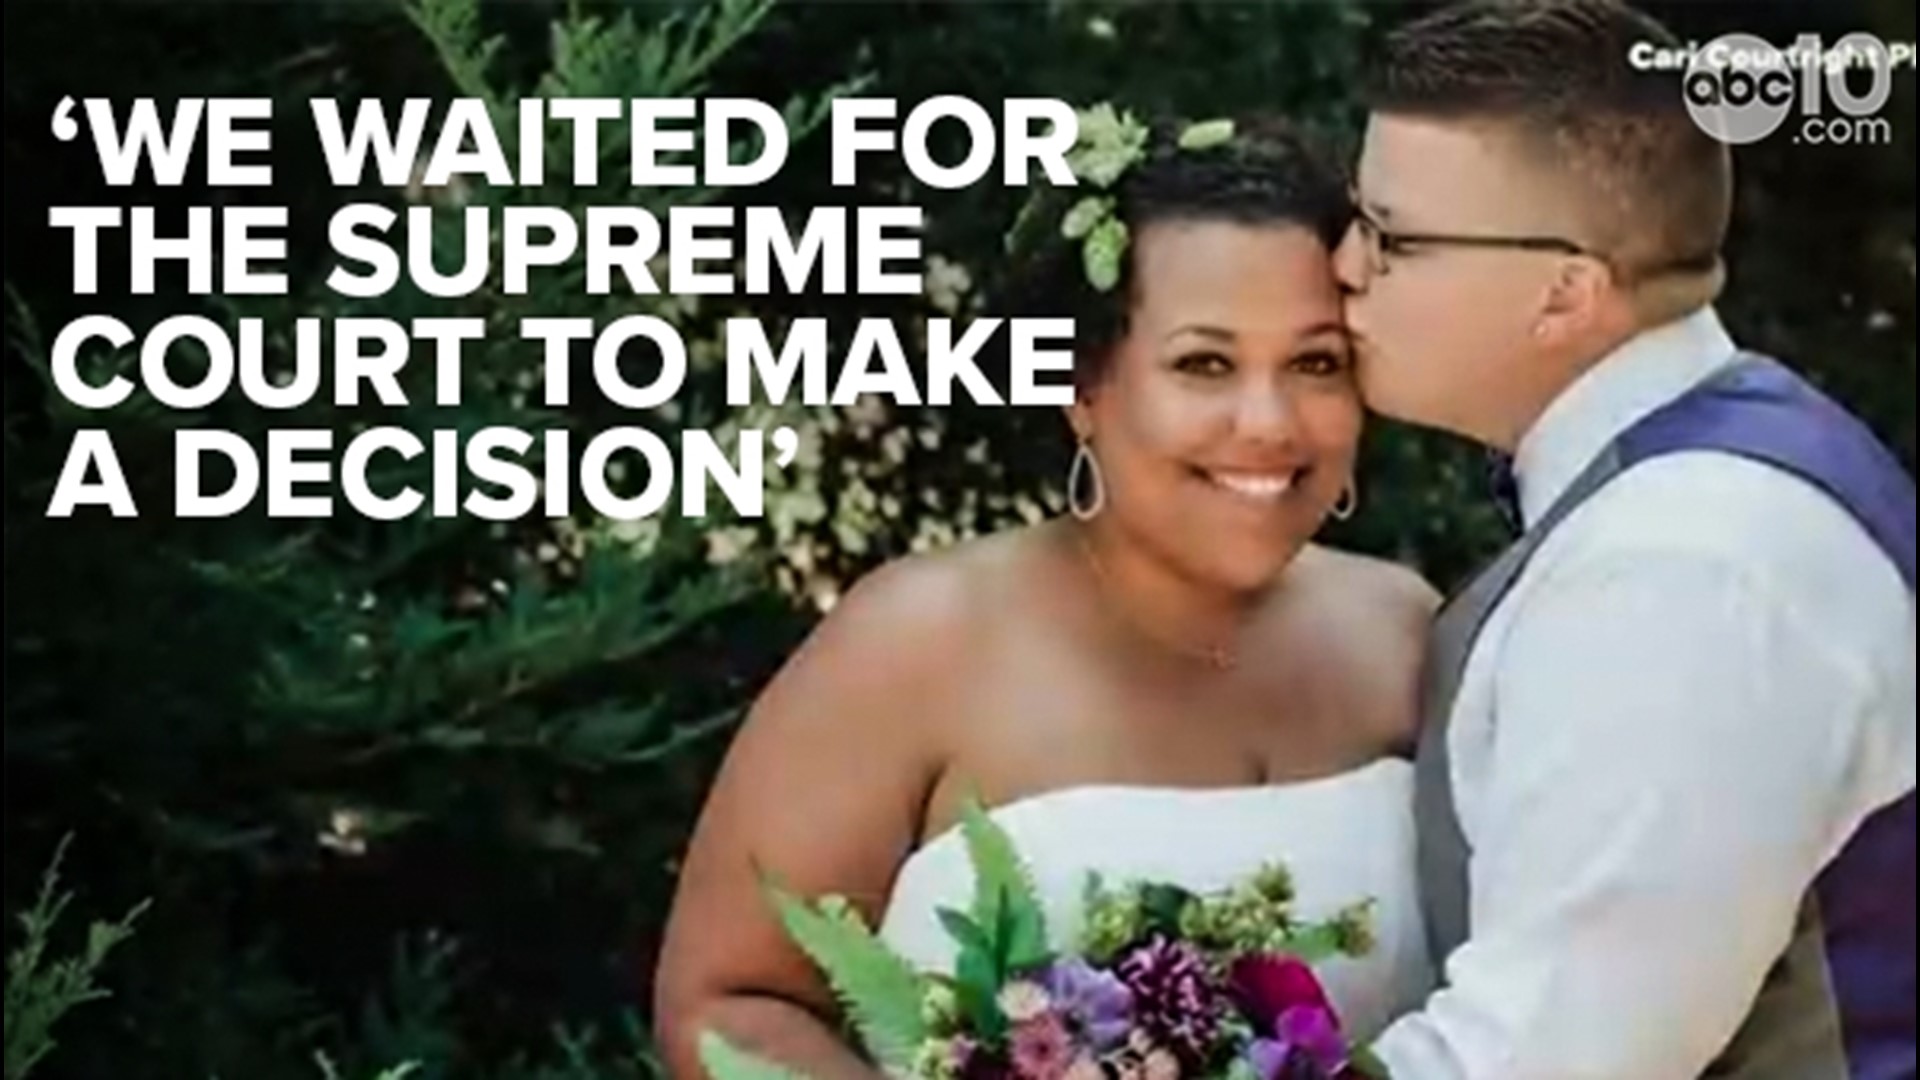 California same-sex couples want gay and interracial marriage rights upheld abc10 hq photo